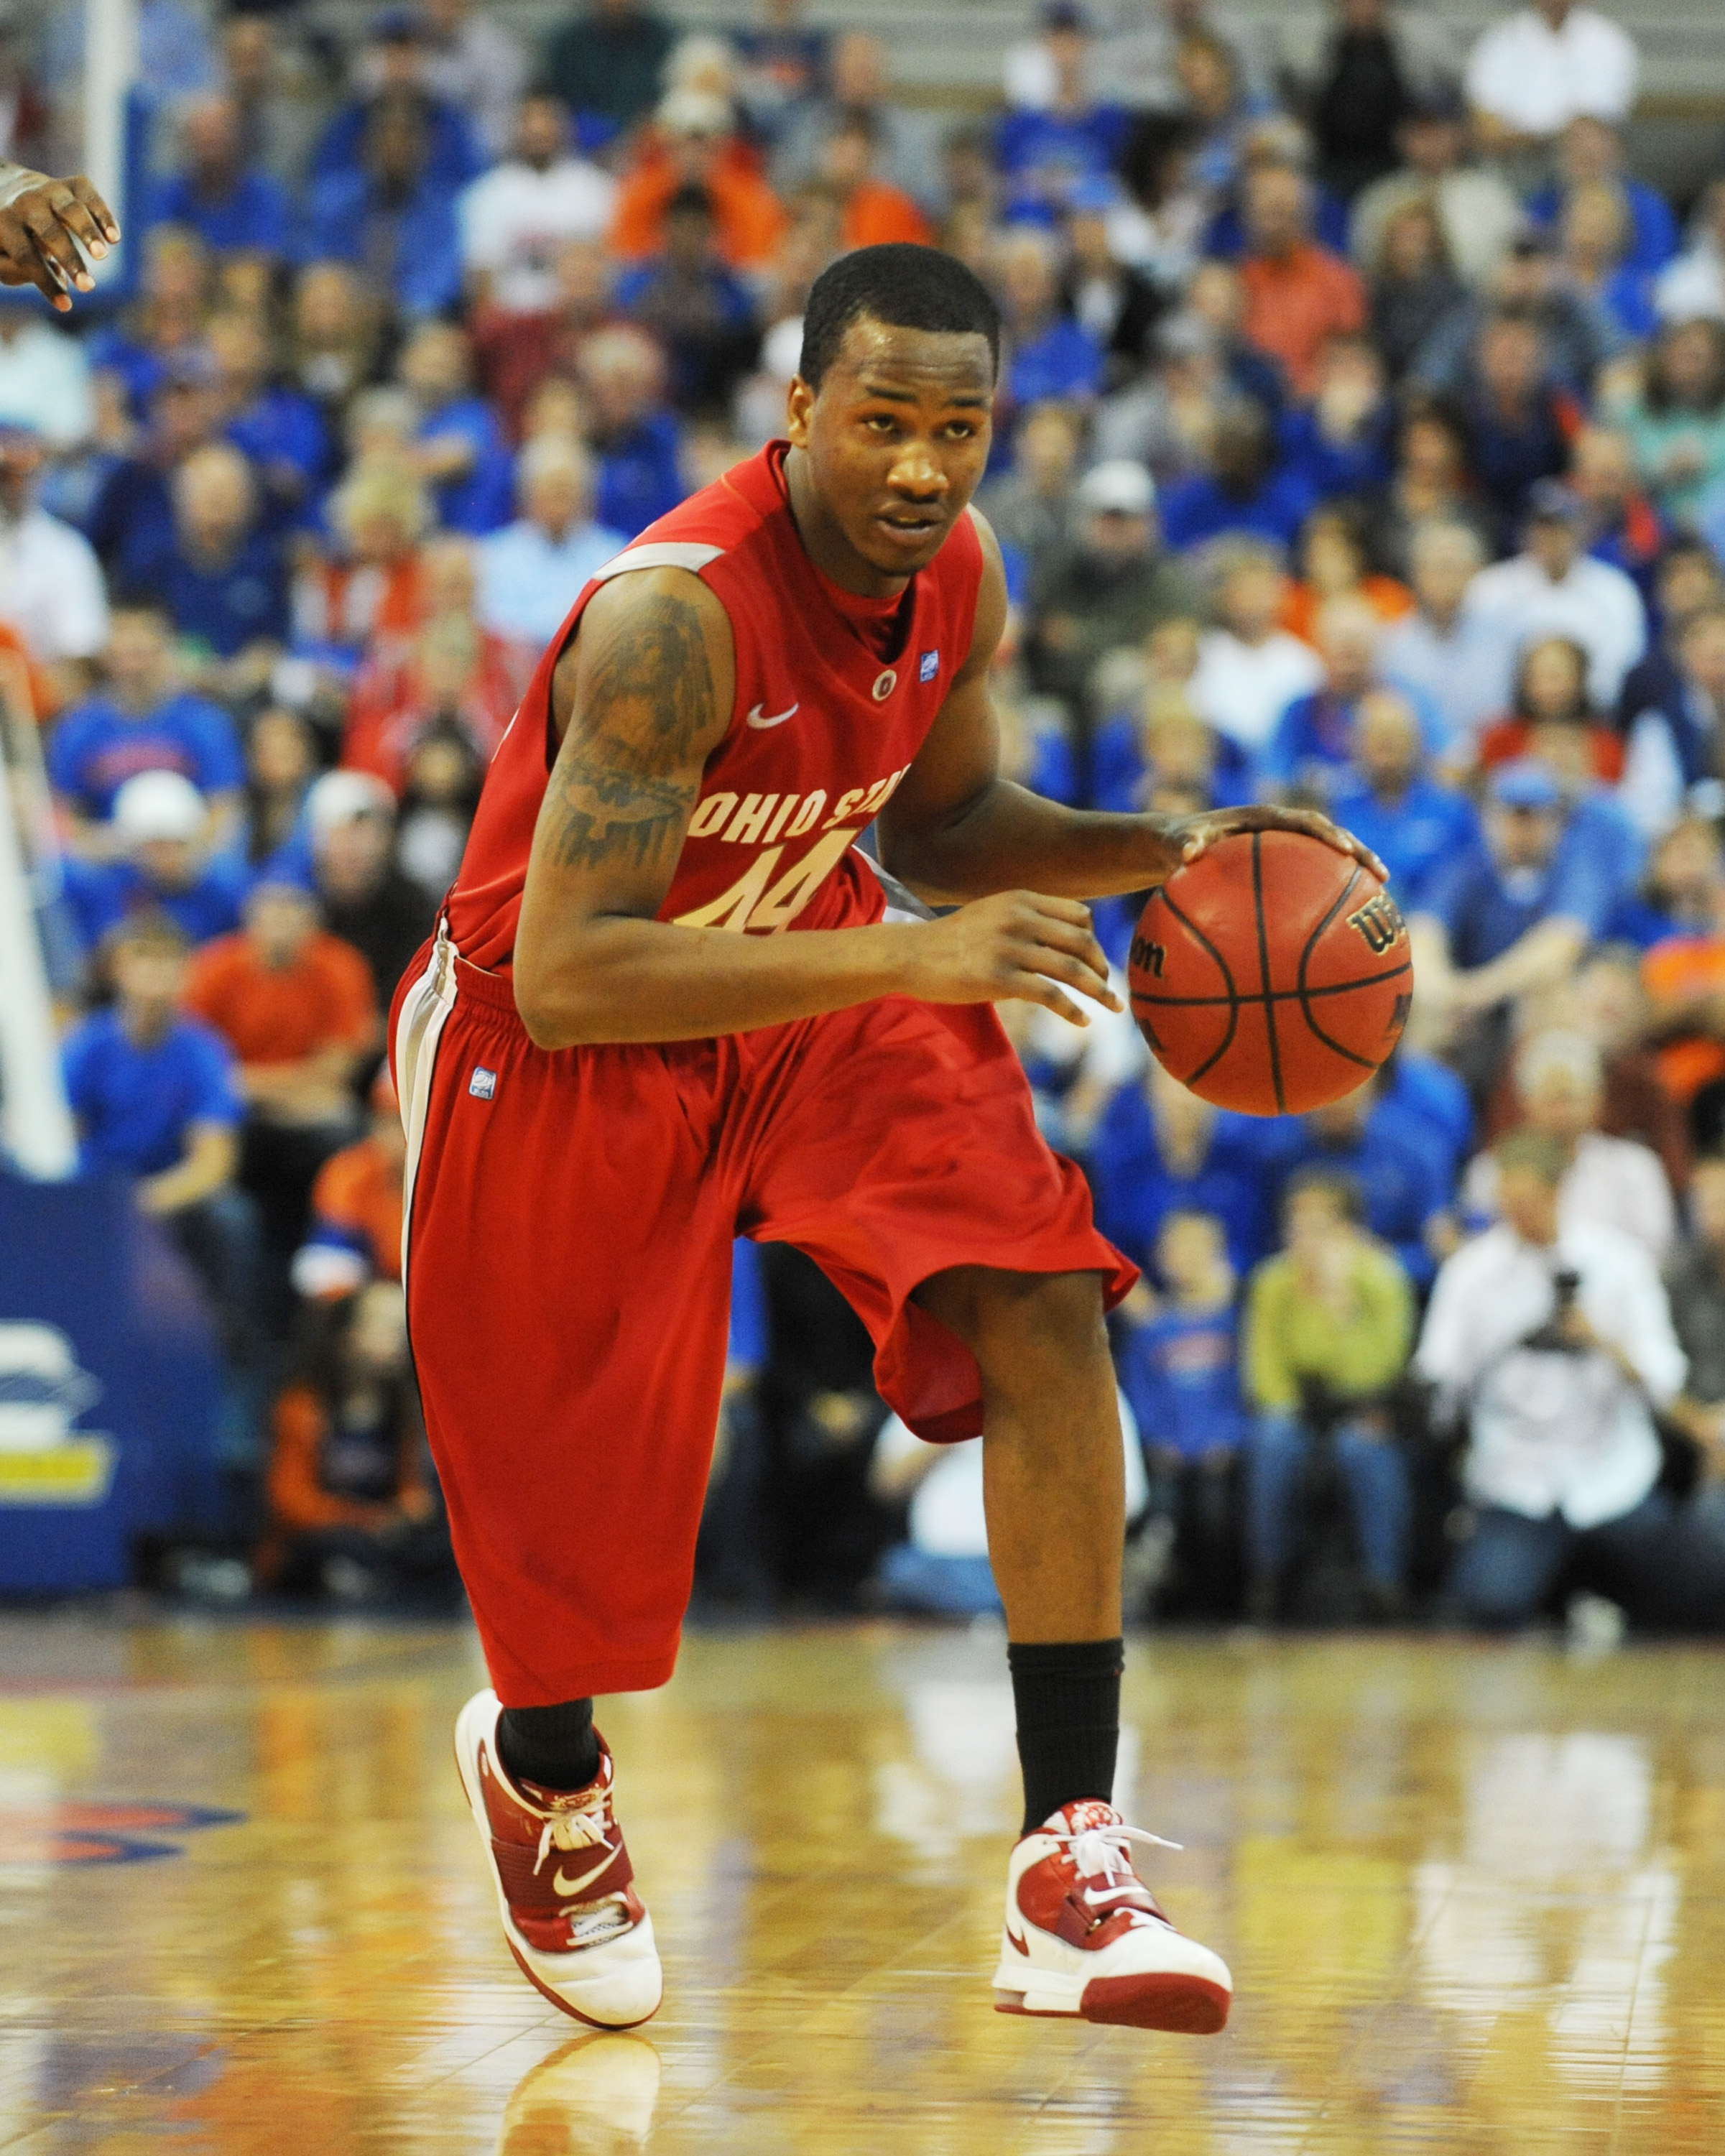 GAINESVILLE, FL - NOVEMBER 16: Guard William Buford #44 of the Ohio State Buckeyes drives upcourt against the Florida Gators November 16, 2010 at the Stephen C. O'Connell Center in Gainesville, Florida.  (Photo by Al Messerschmidt/Getty Images)